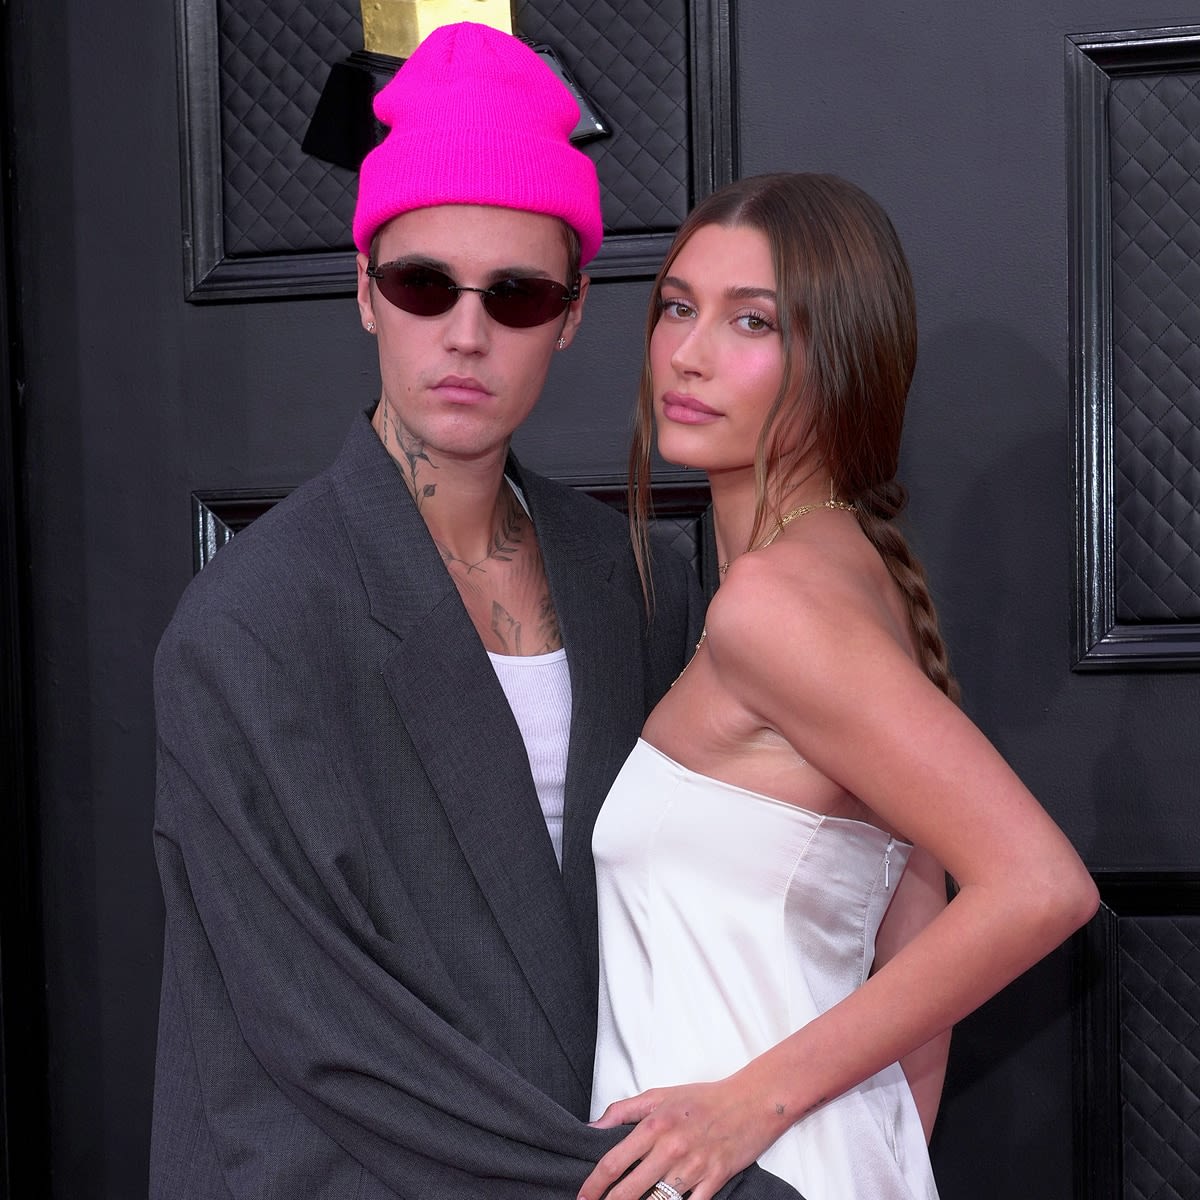 Pregnant Hailey Bieber Gives Shoutout to "Baby Daddy" Justin Bieber